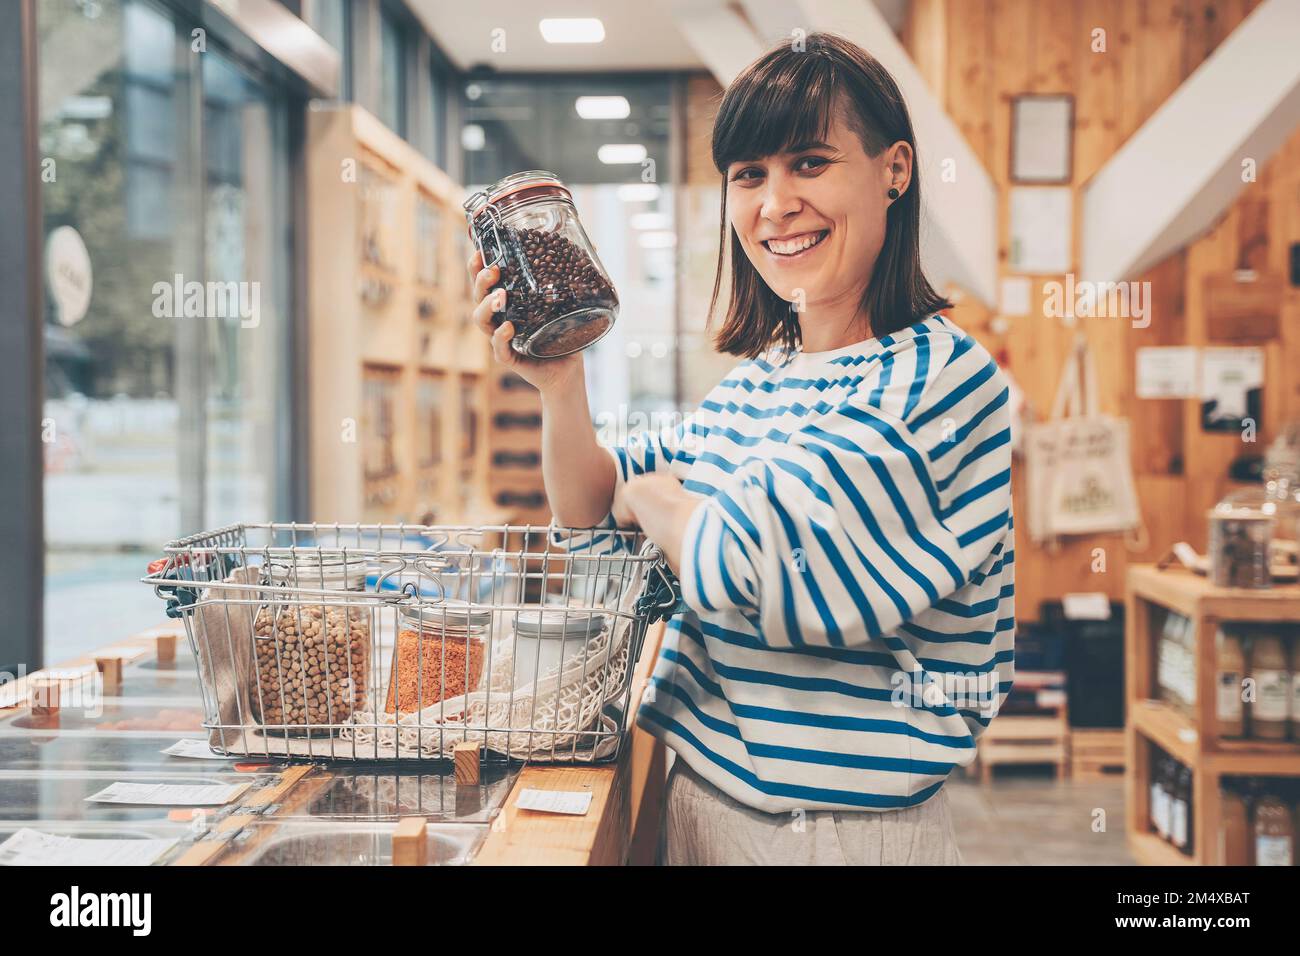 Smiling customer with kidney beans jar at counter in convenience store Stock Photo